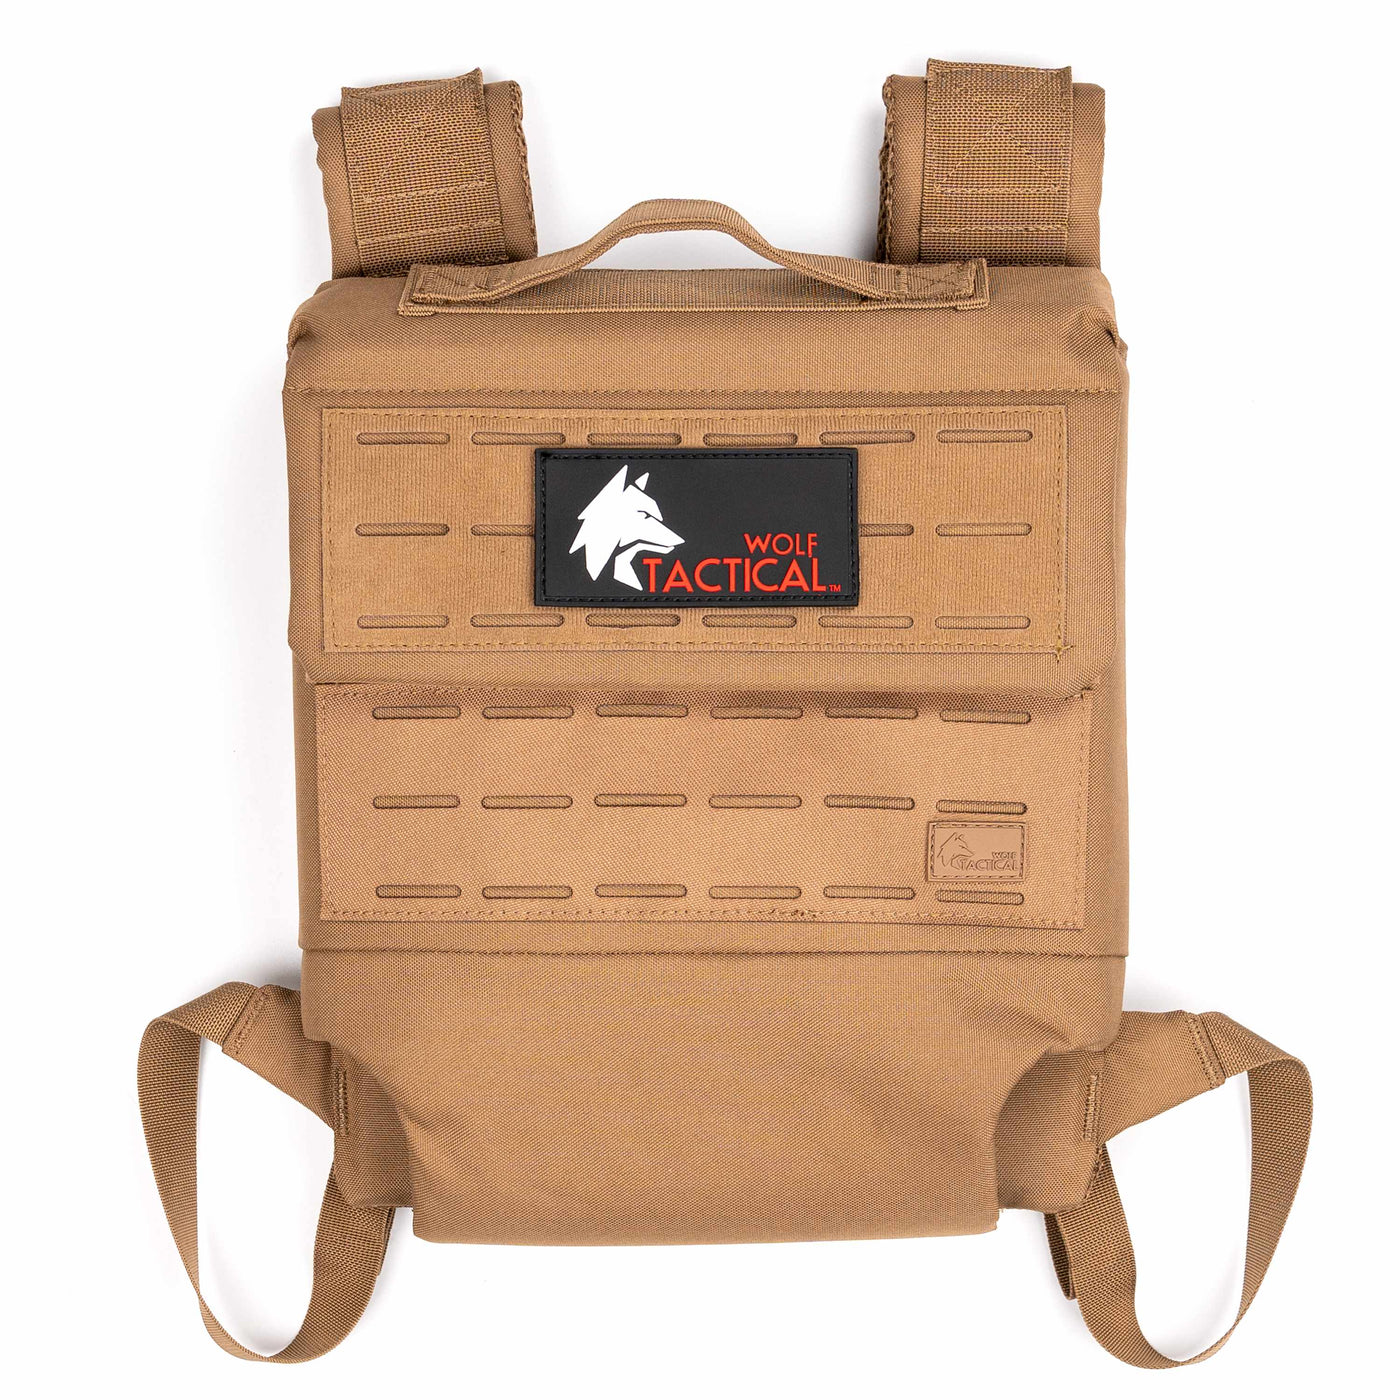 Weighted Backpack Plate Carrier